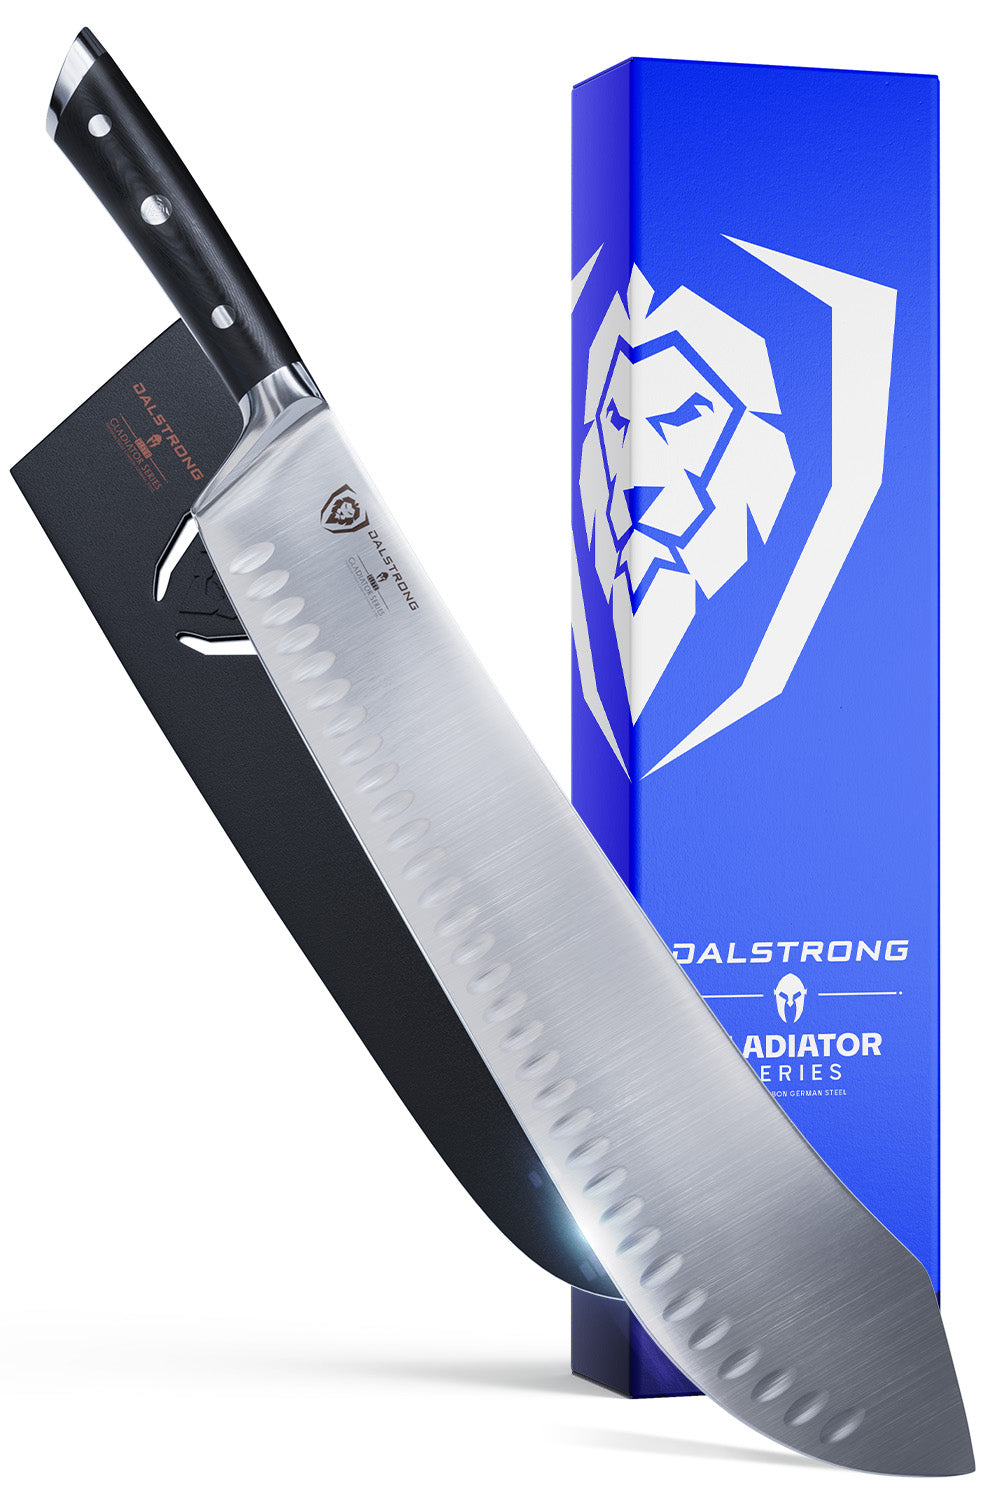 Extra-Long Bull Nose Butcher Knife 14" | Gladiator Series | NSF Certified | Dalstrong ©